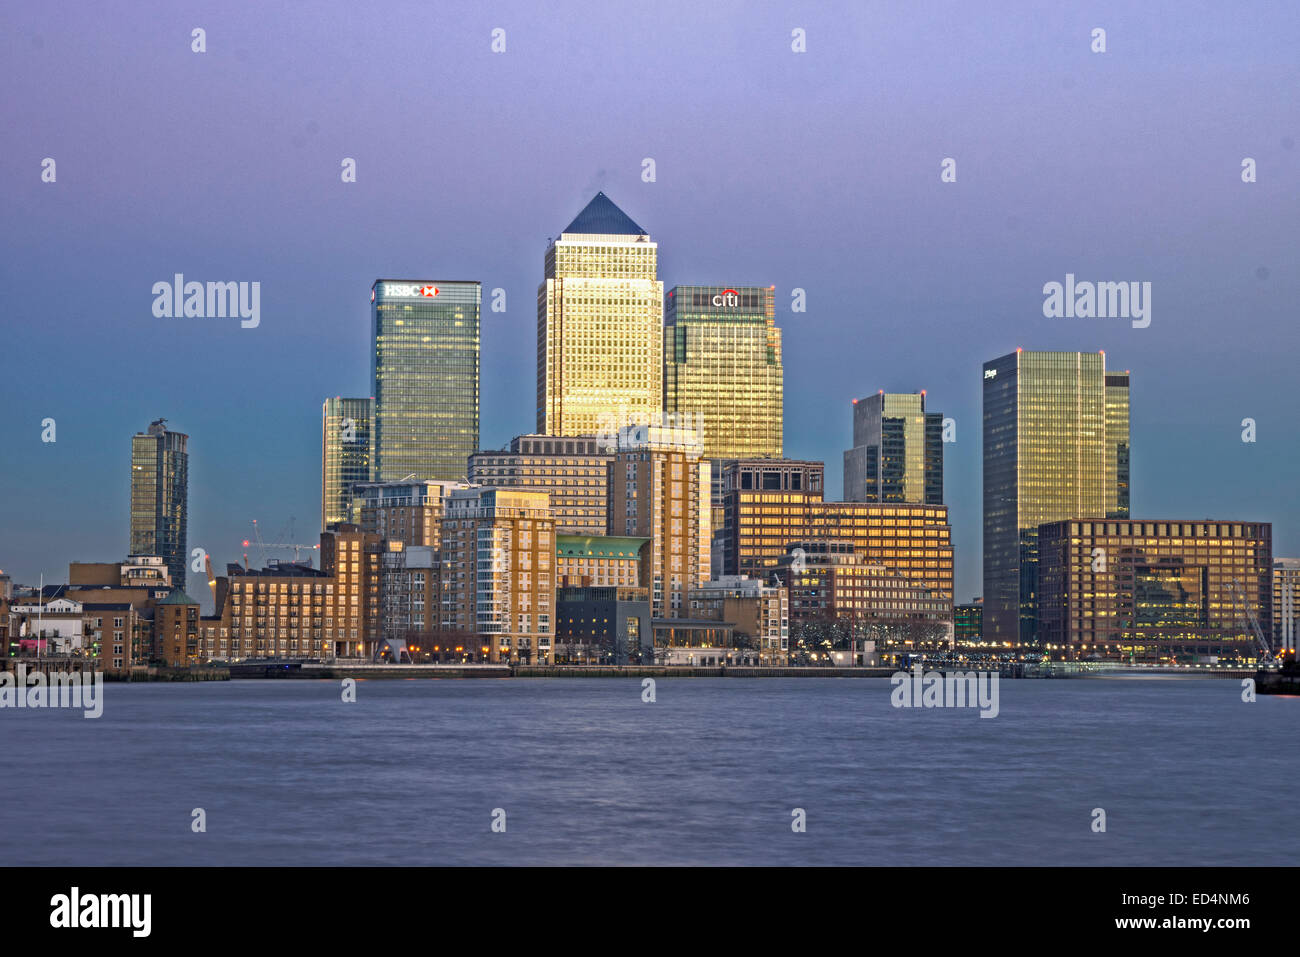 Canary Wharf skyscrapers  London Financial district Stock Photo